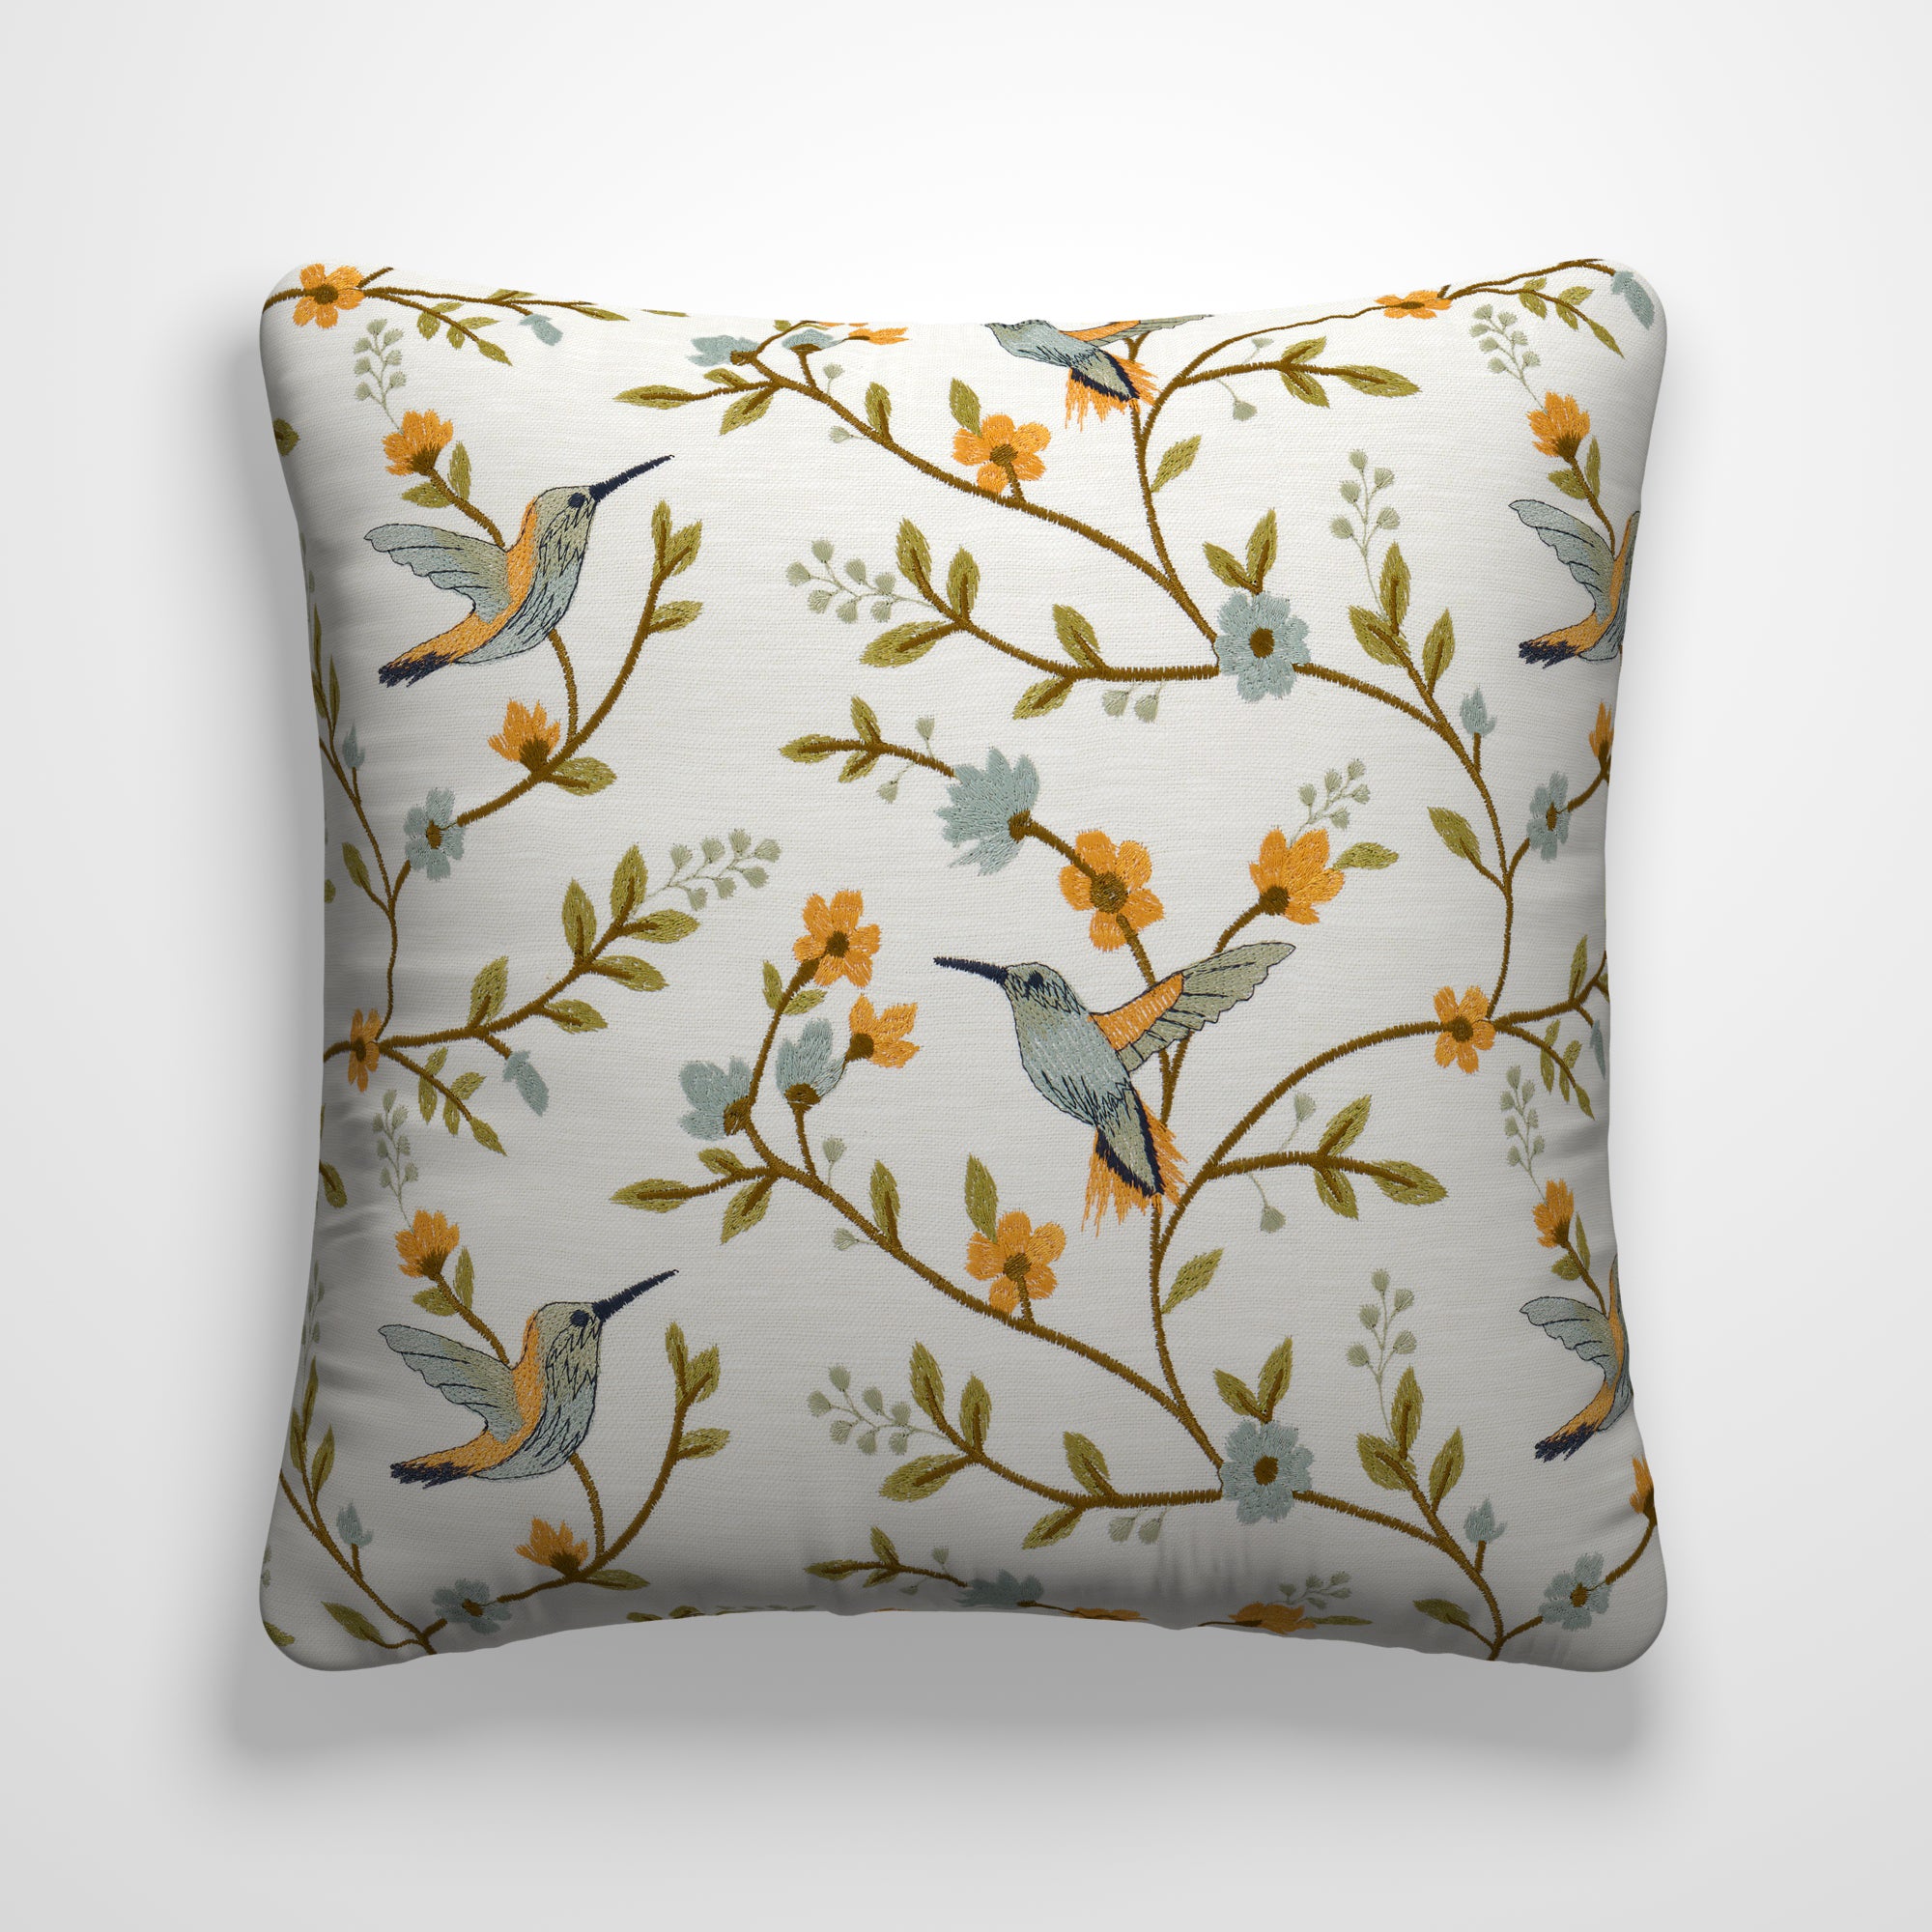 Xantus Made to Order Cushion Cover Xantus Clementine